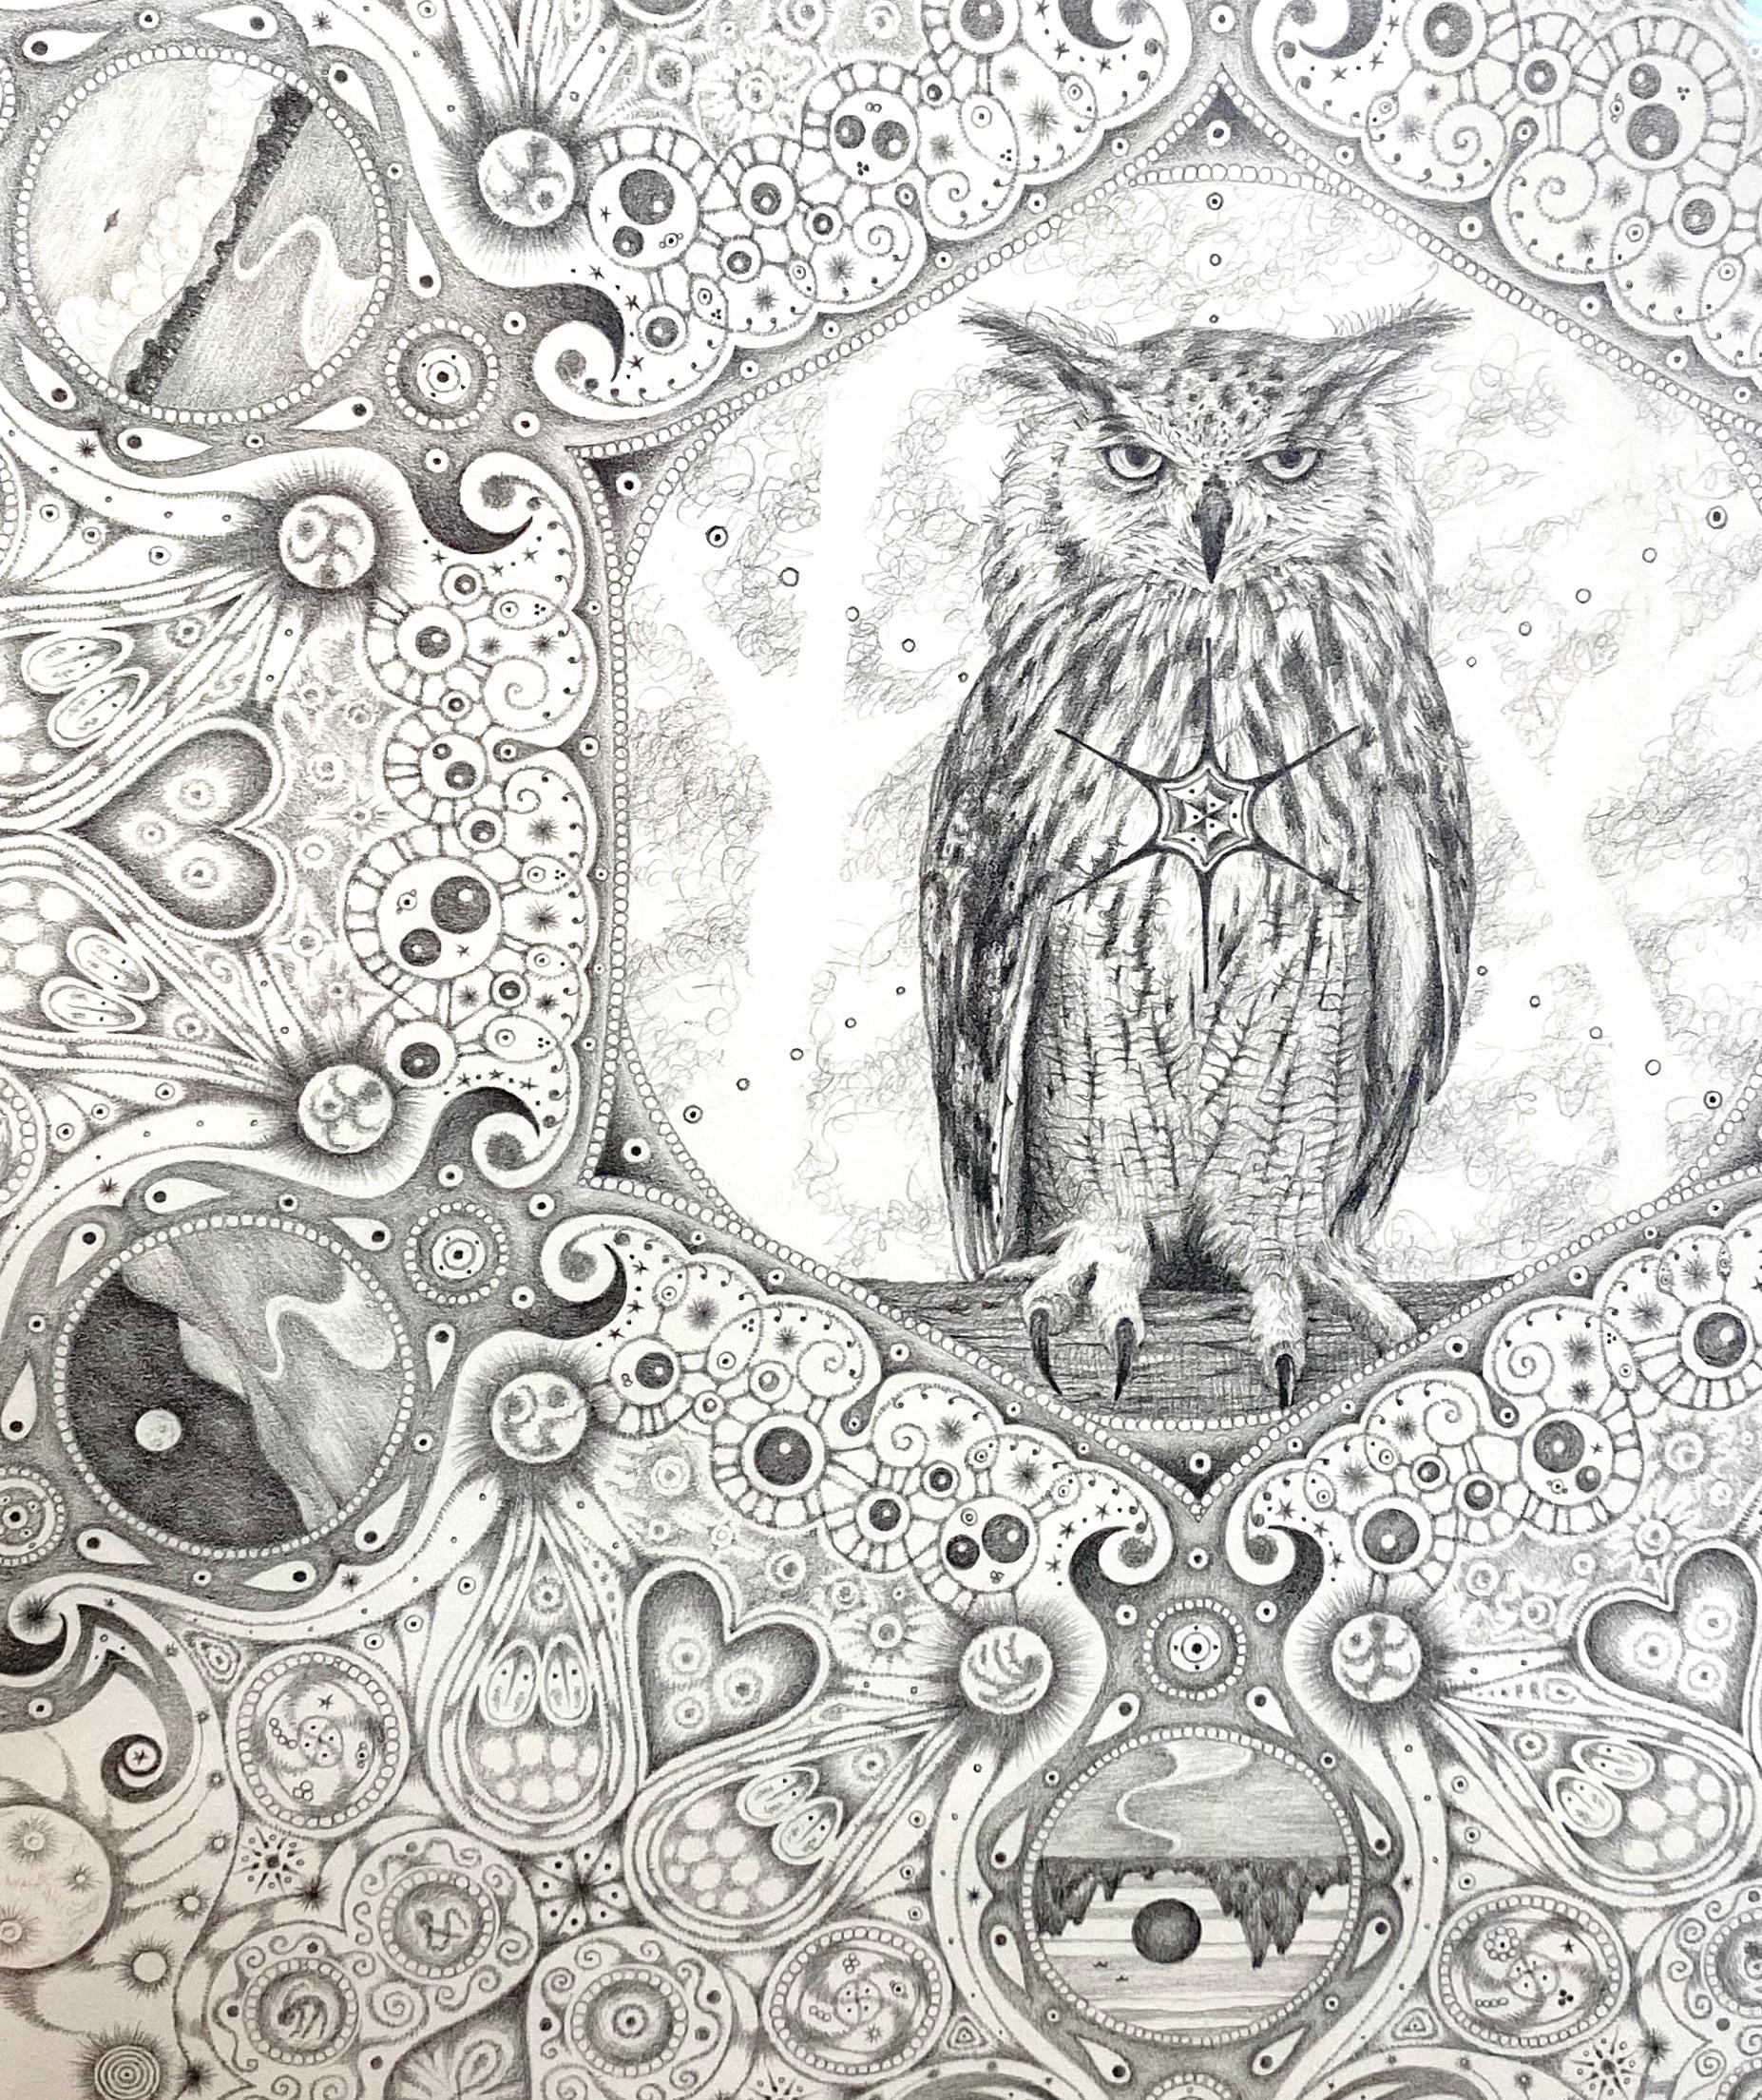 Snowflakes 84 Forester, Mandala Pencil Drawing, Owl, Cosmic Imagery, Landscapes For Sale 1